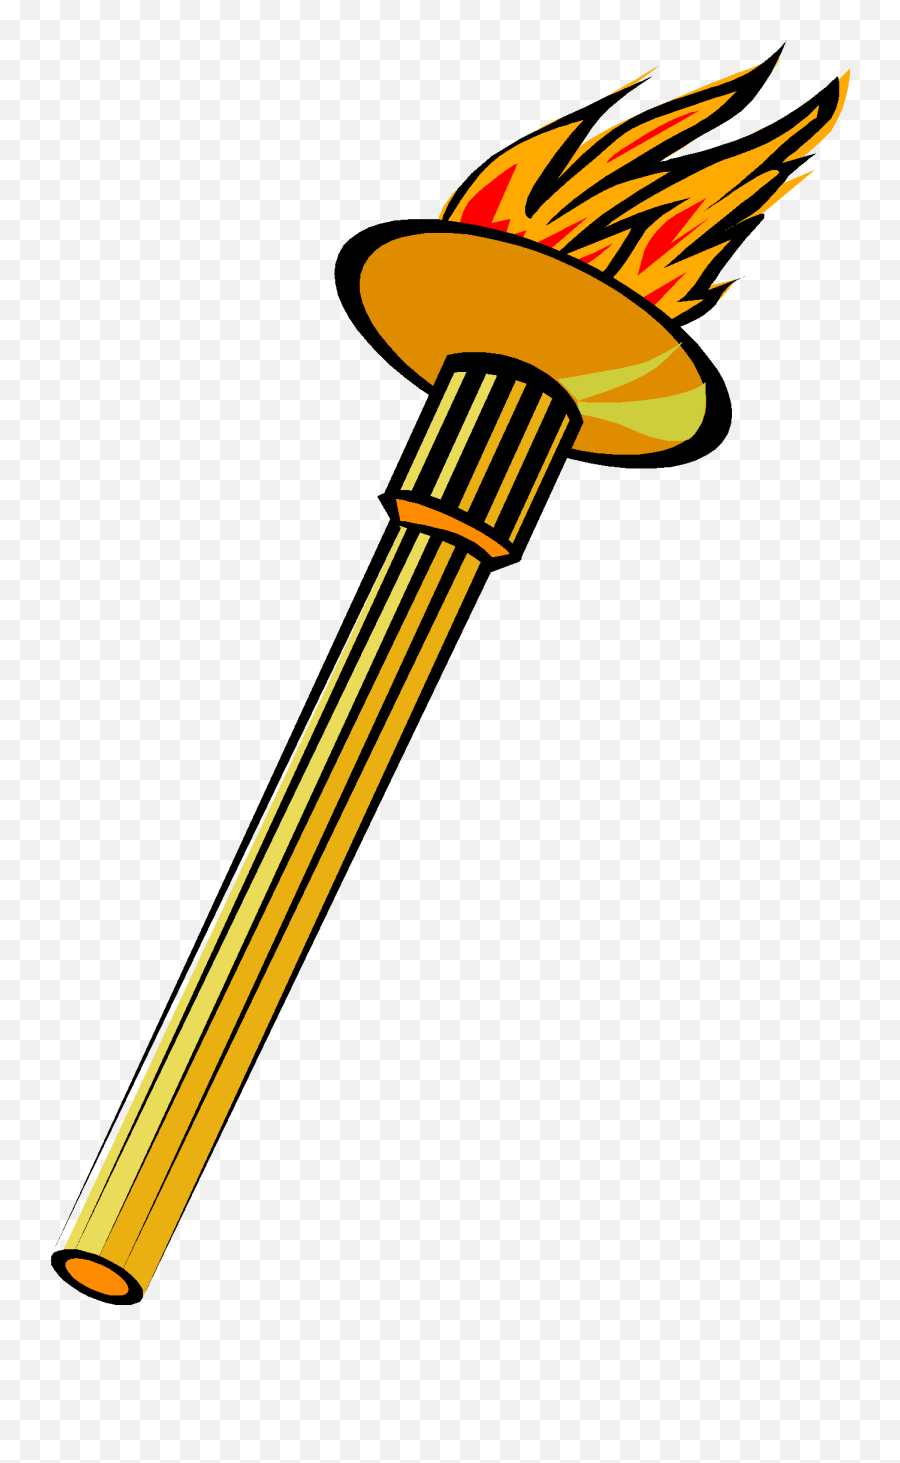 Games Clipart Olympic Games Olympic - Olympic Transparent Torch Emoji,Olympic Torch Emoji